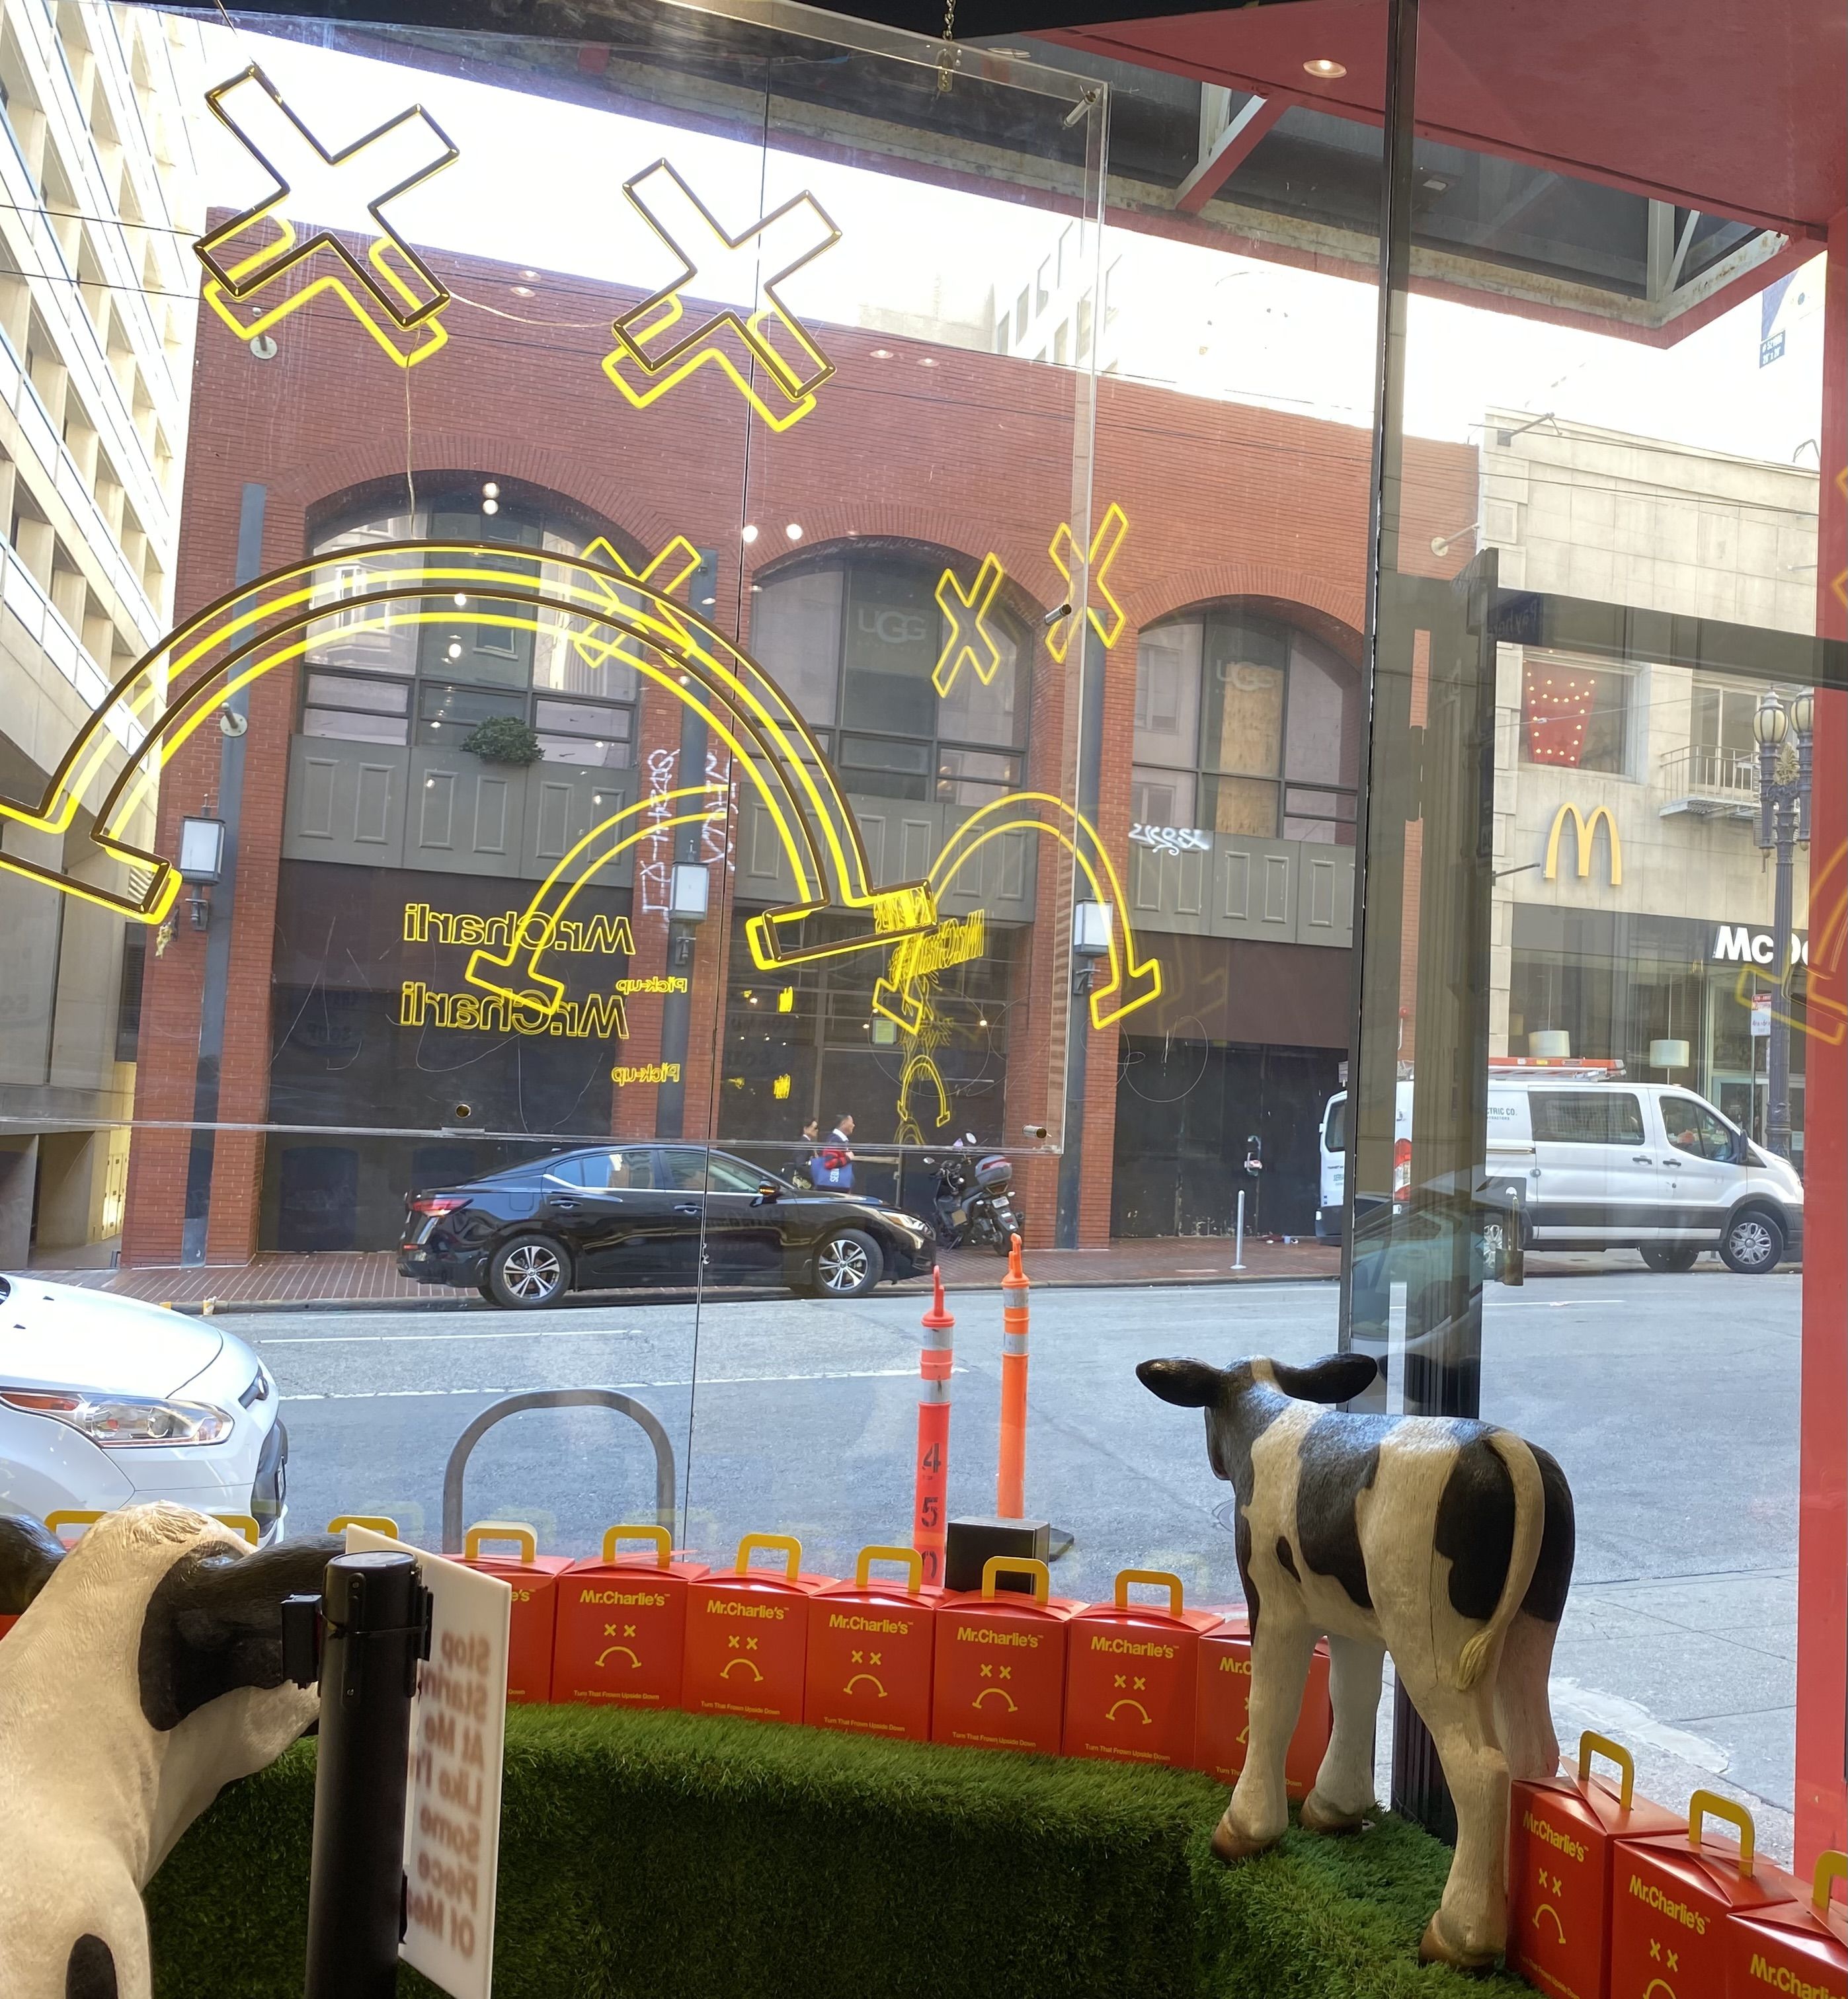 A photo showing yellow illuminated lights in the shape of a frowning face on a window. Below the lights are fake cows looking out the window. Across the street is a McDonald's logo.